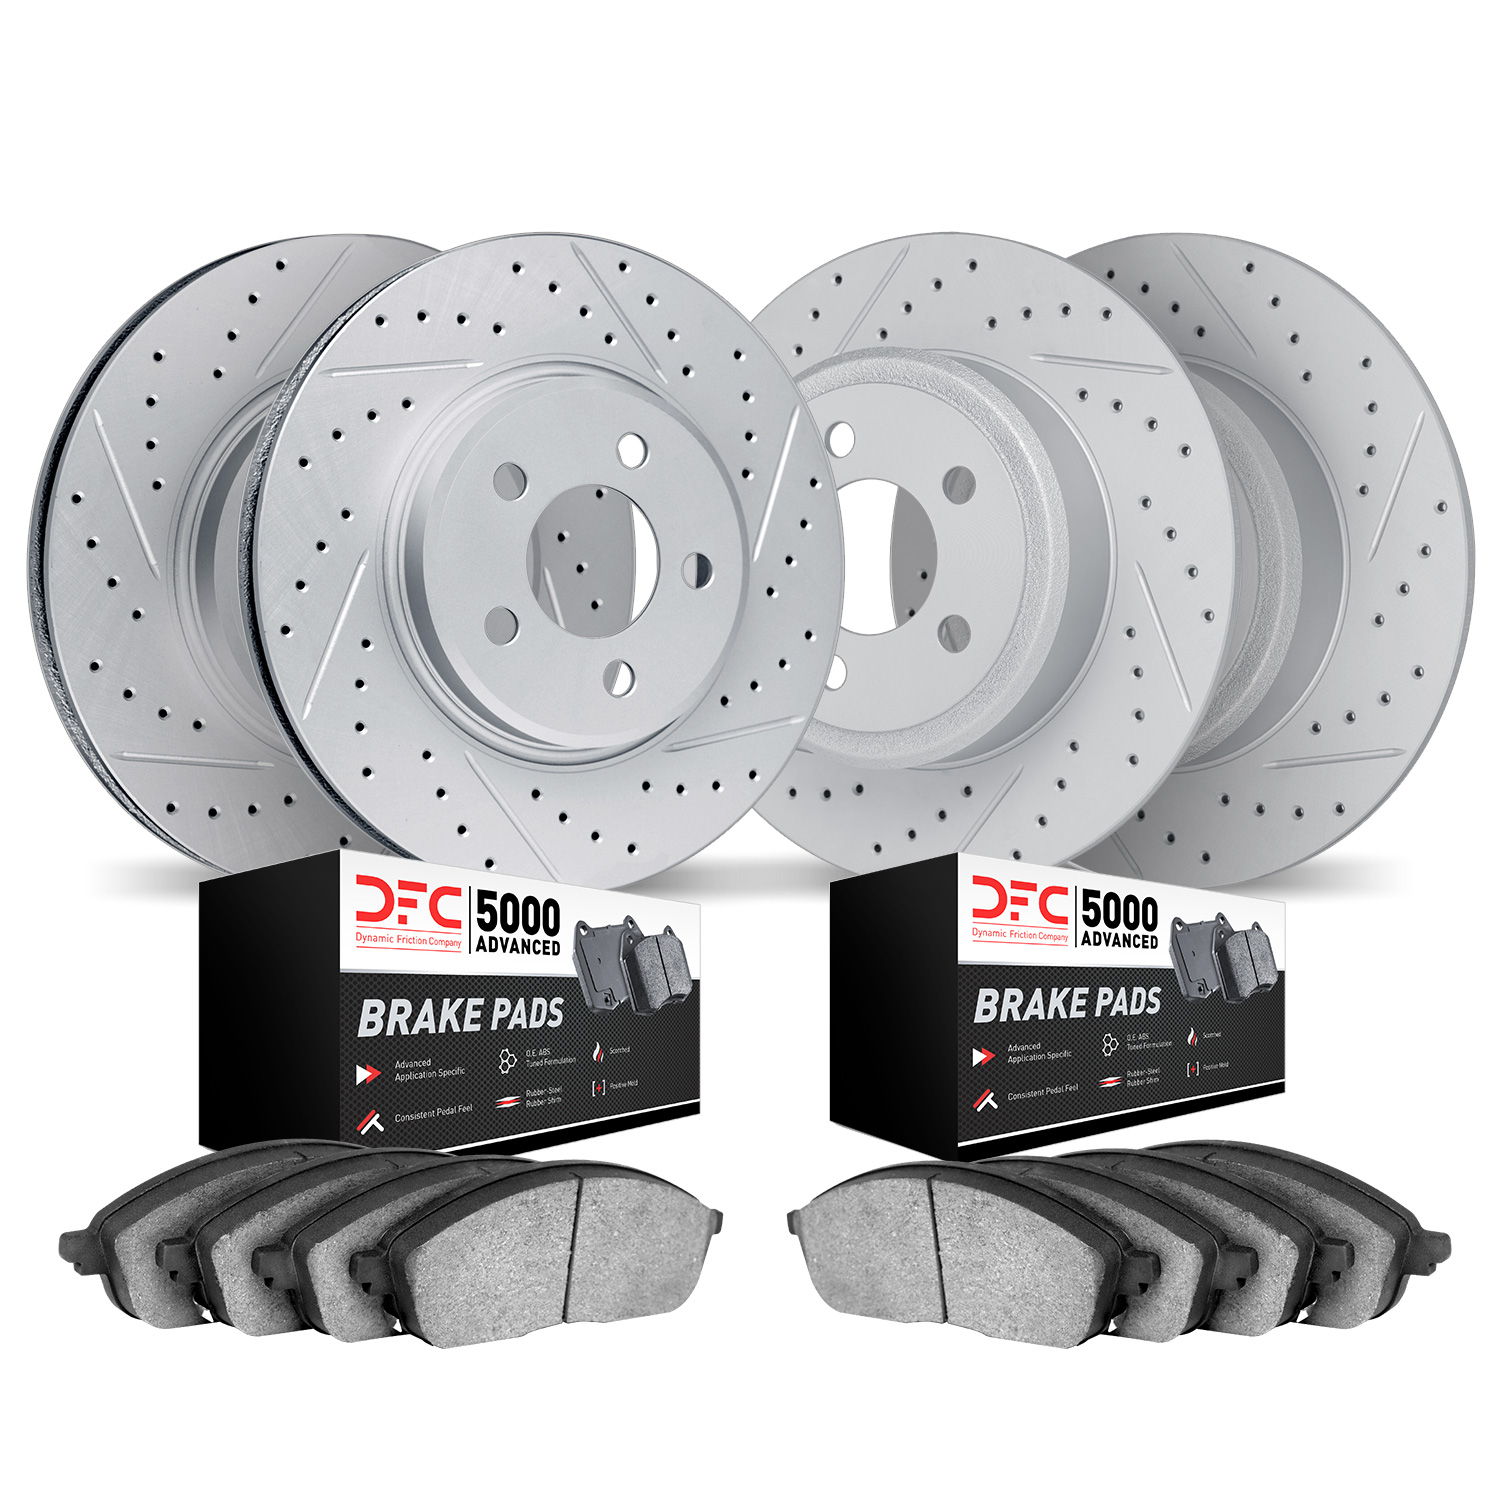 2504-40109 Geoperformance Drilled/Slotted Rotors w/5000 Advanced Brake Pads Kit, 2014-2021 Mopar, Position: Front and Rear